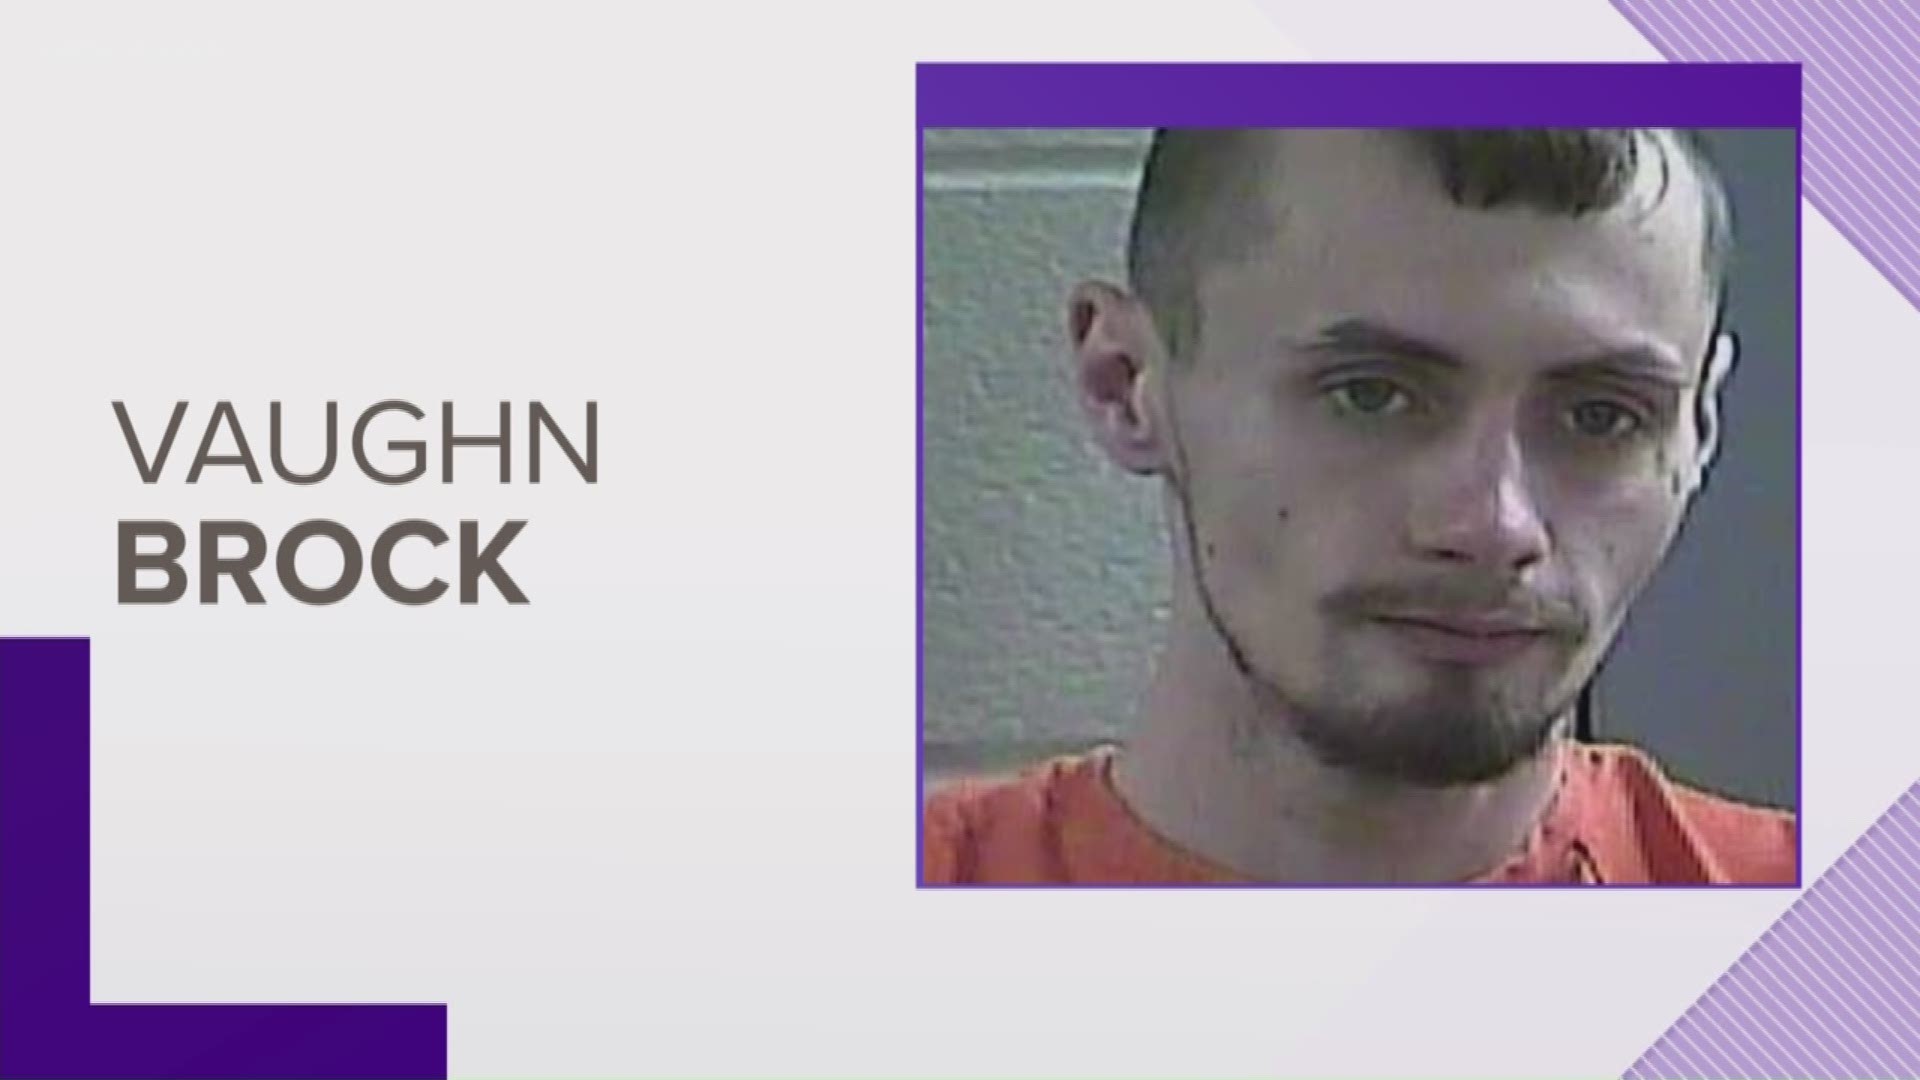 26-year-old Vaughn Brock is now in jail after he ran away from a fire inside his home in the town of London in southern Kentucky.